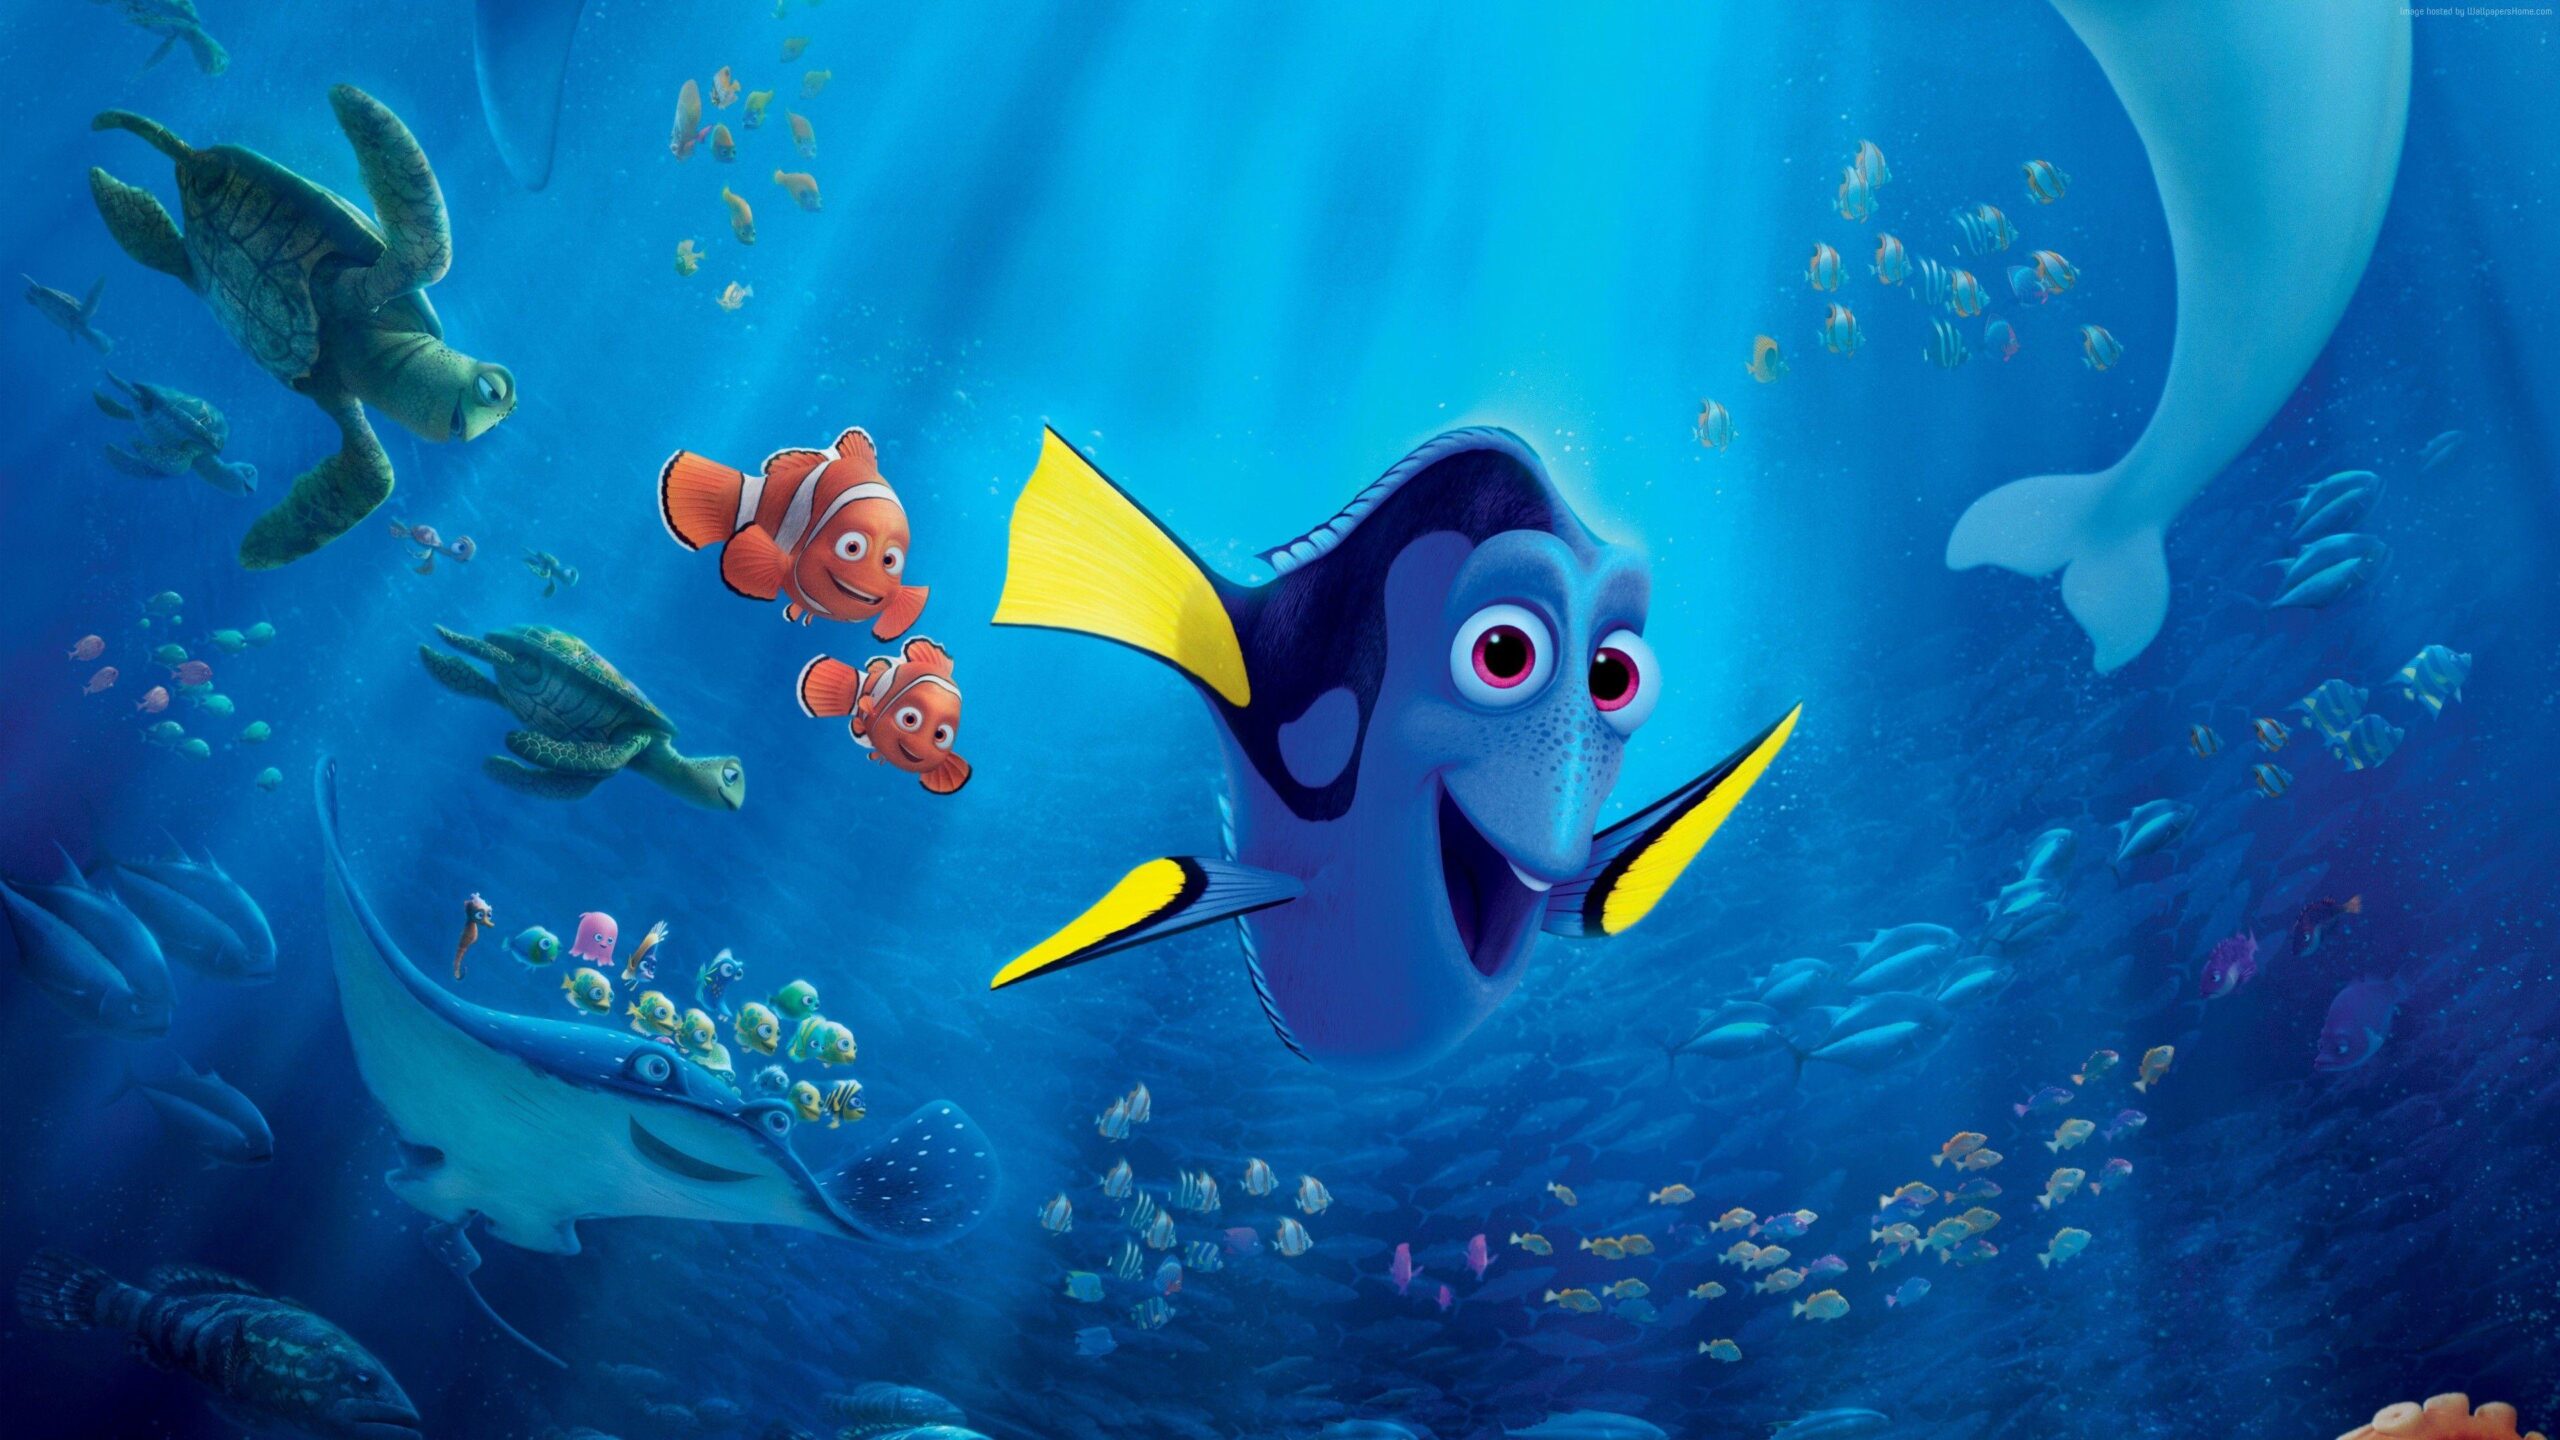 Finding Dory Wallpaper, Movies Finding Dory, hank, nemo, fish